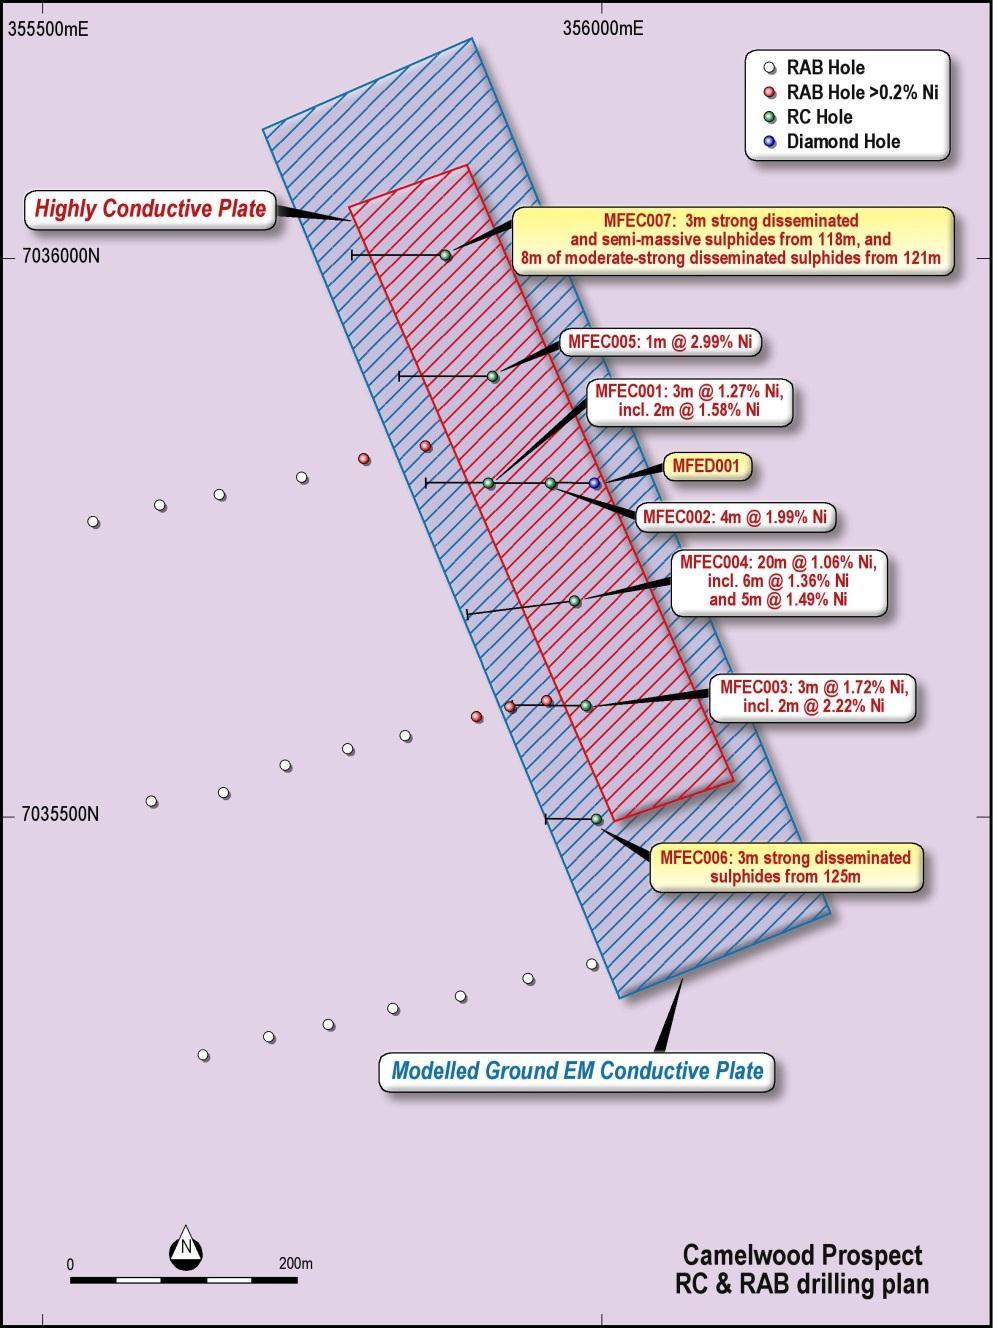 Camelwood Drill Plan Initially 3 lines of RAB at Camelwood RAB anomaly coincident with VTEM conductor RAB anomaly included 8m @ 0.4% Ni, with values up to 0.